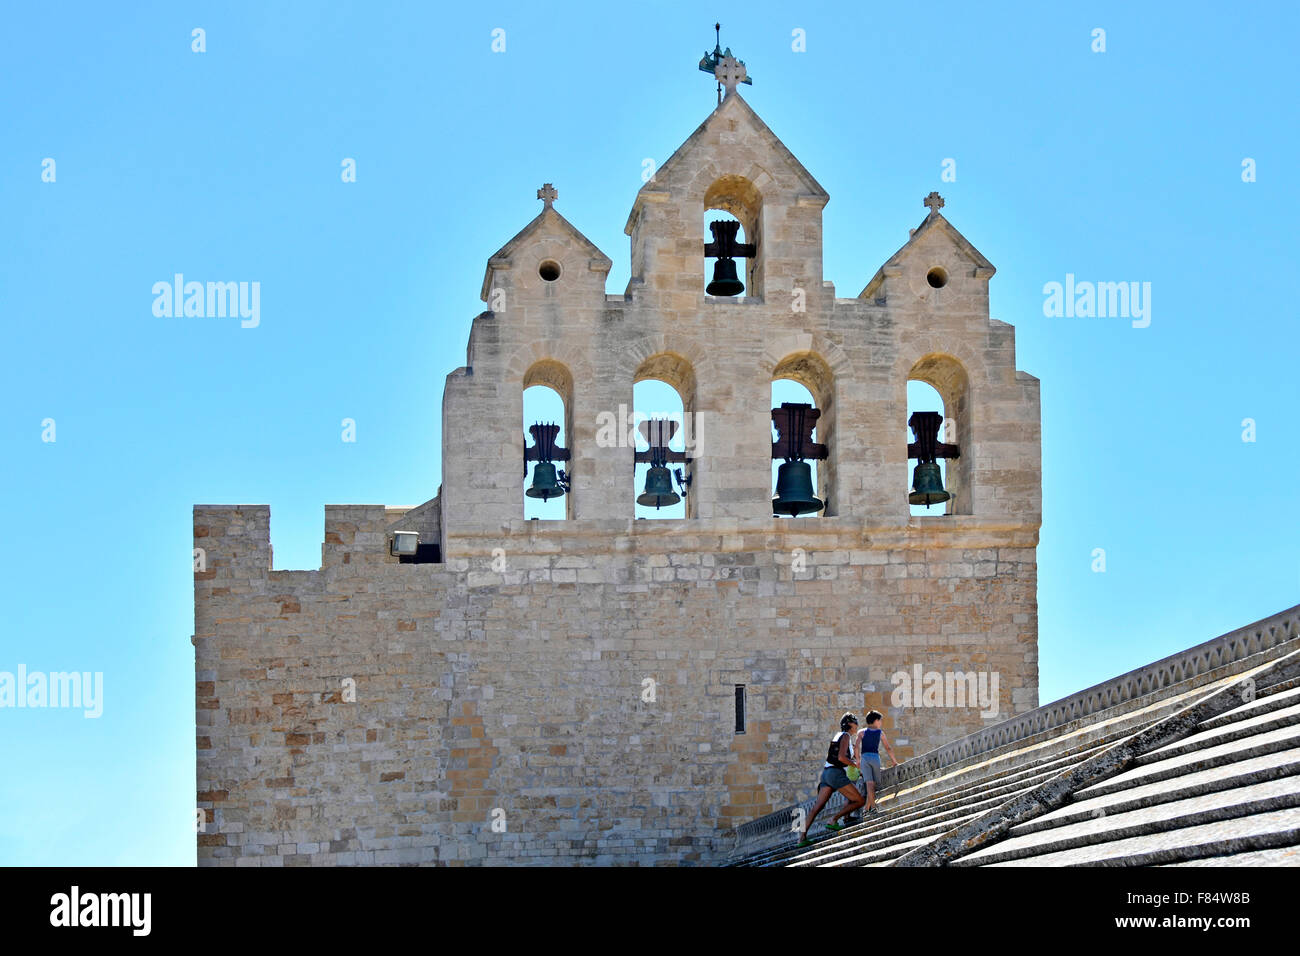 Bell tower and belfry with tourists paying for sightseeing on roof of the church Les Saintes-Maries-de-la-Mer in Saintes Maries de la Mer France Stock Photo